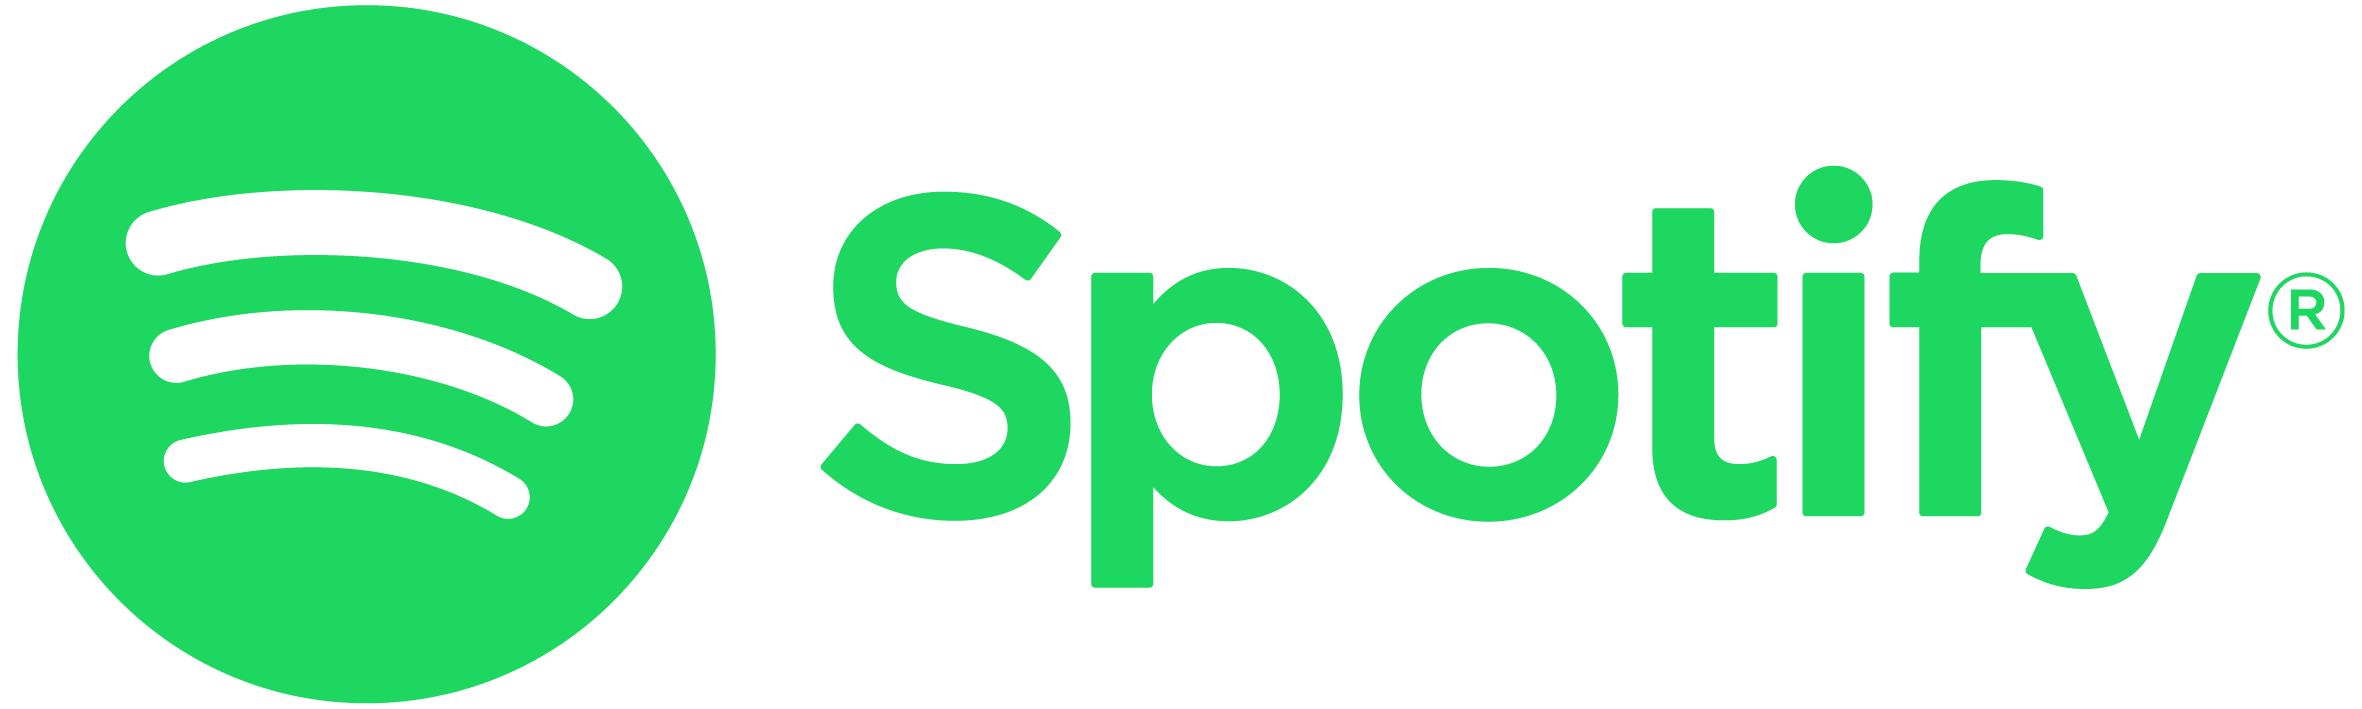 Spotify's logo, featuring a green circle with three curved lines representing sound waves on the left, and the word 'Spotify' in a bold, modern font with a capital 'S' and lowercase letters for the rest, accompanied by a registered trademark symbol on the top right side, all in the same vibrant green color.